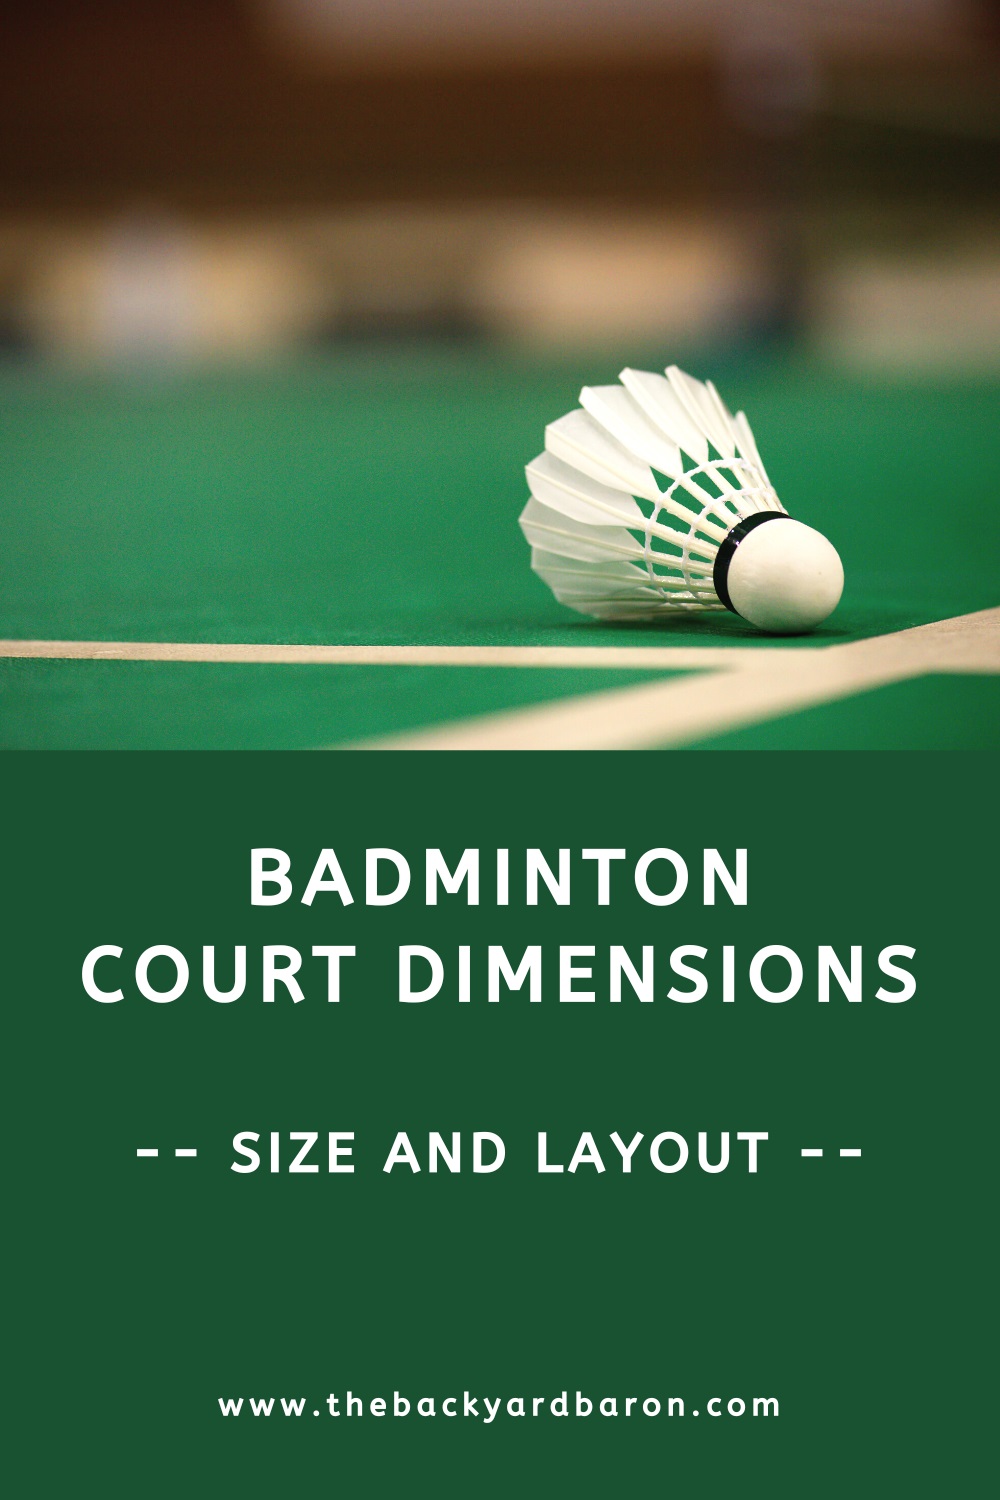 Badminton court dimensions guide (size and layout)